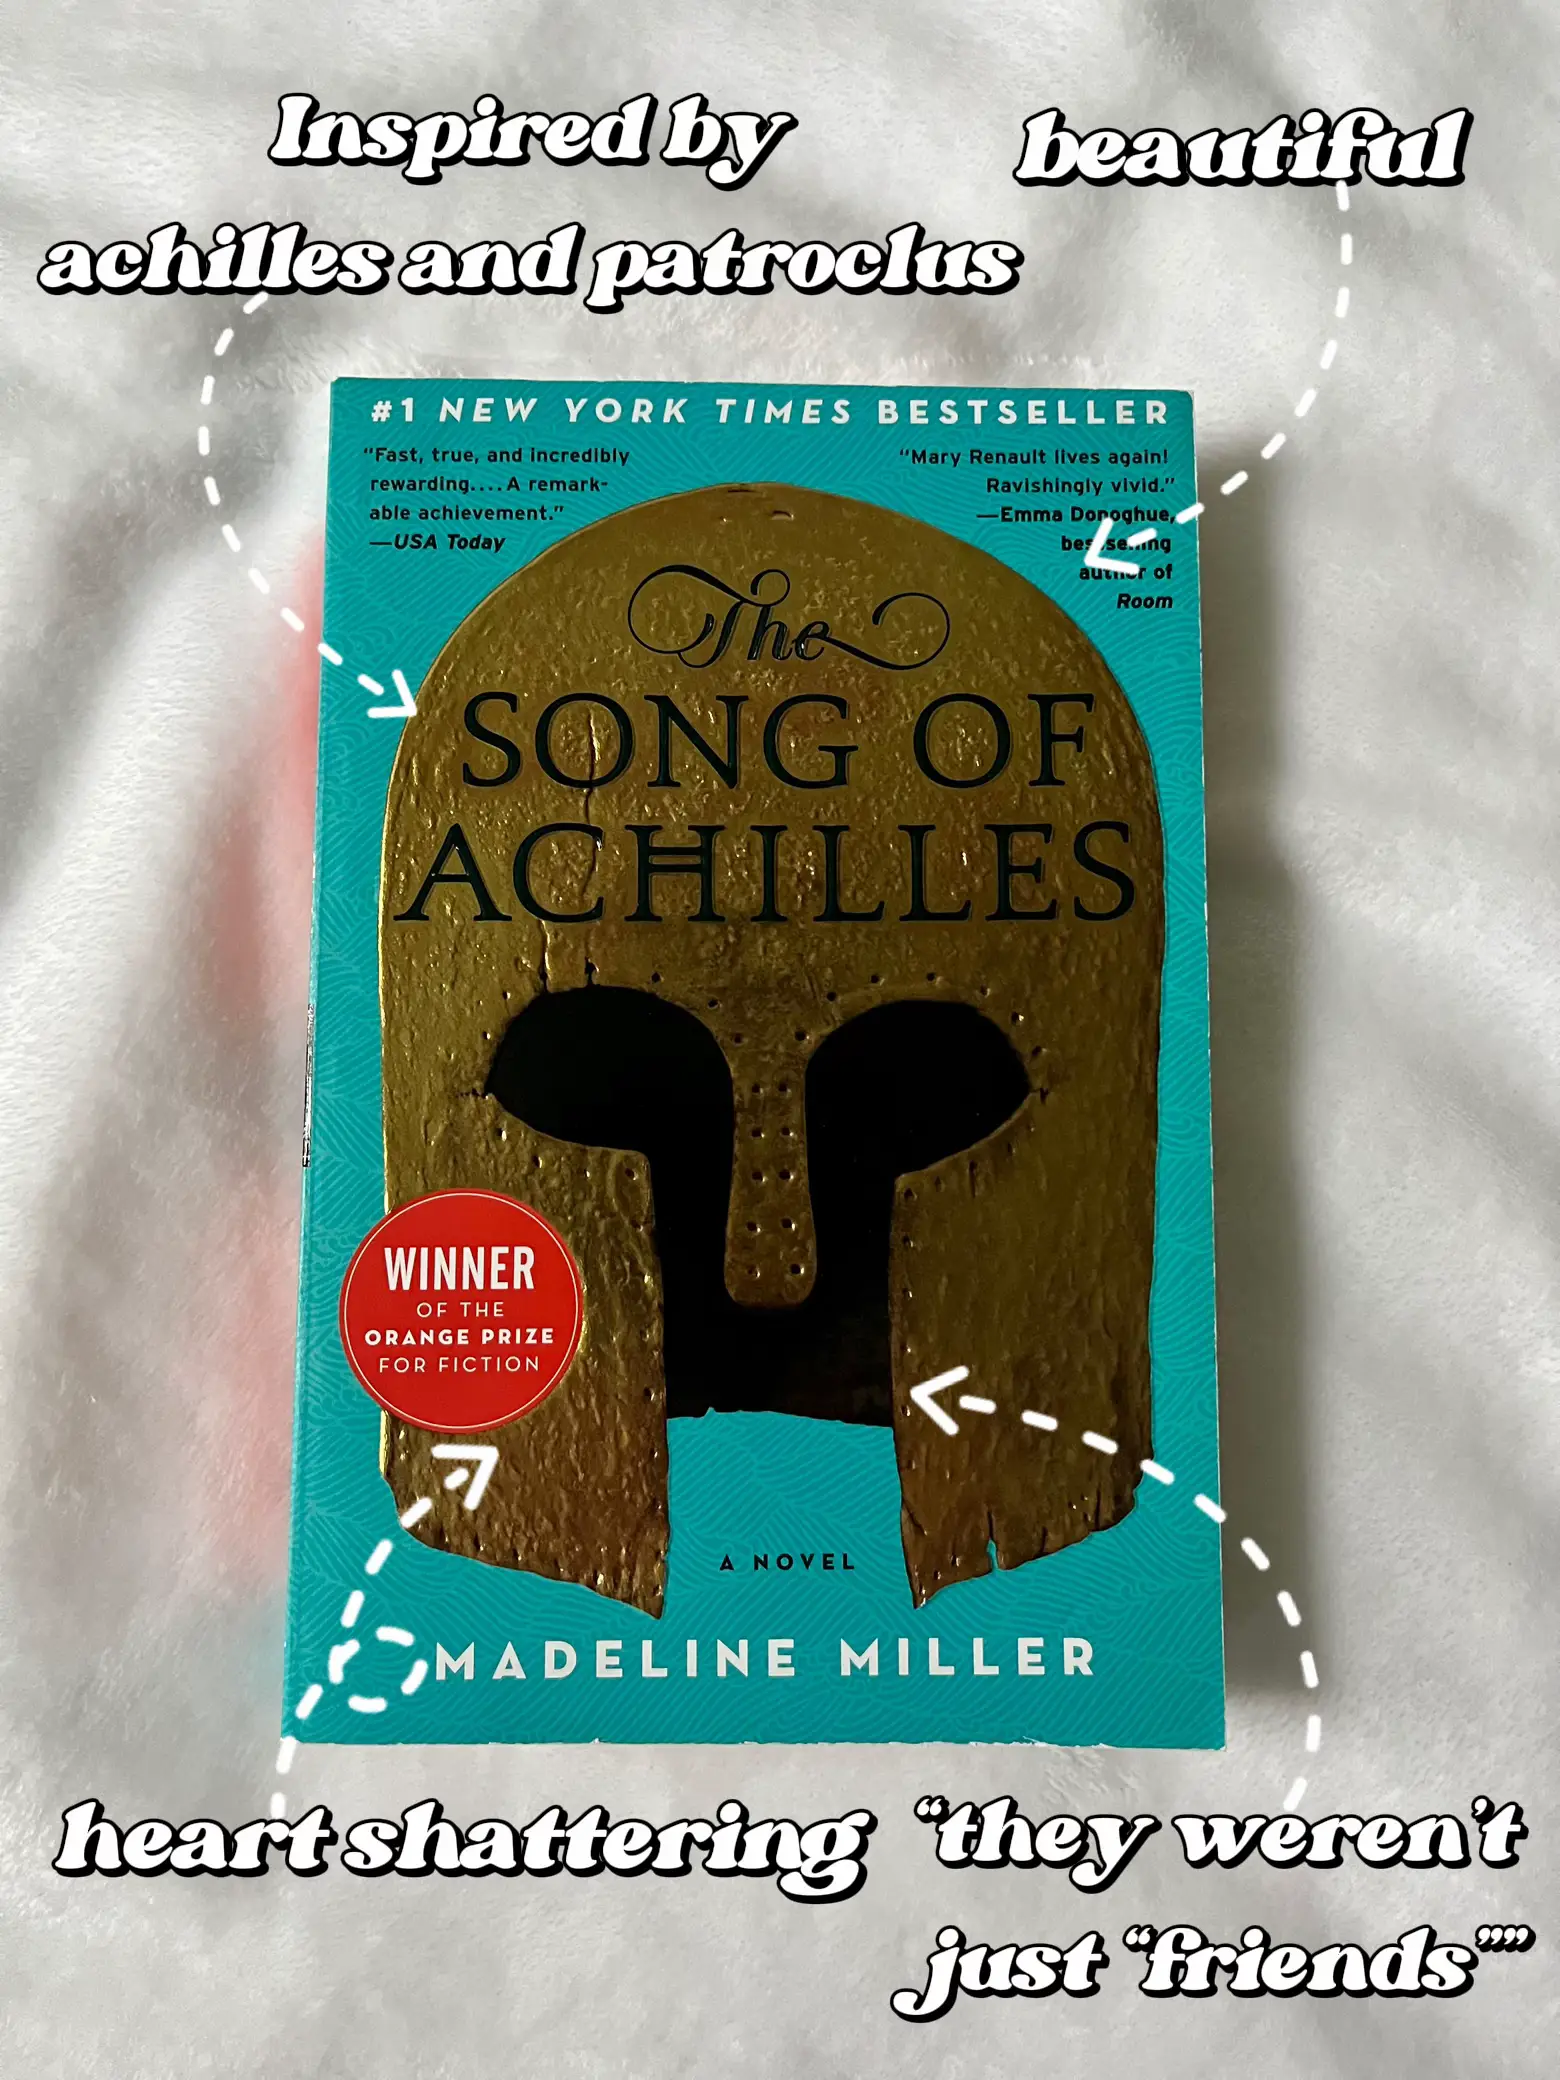 Madeline Miller 3 Books Collection Set (The Song of Achilles, Circe,  Galatea)